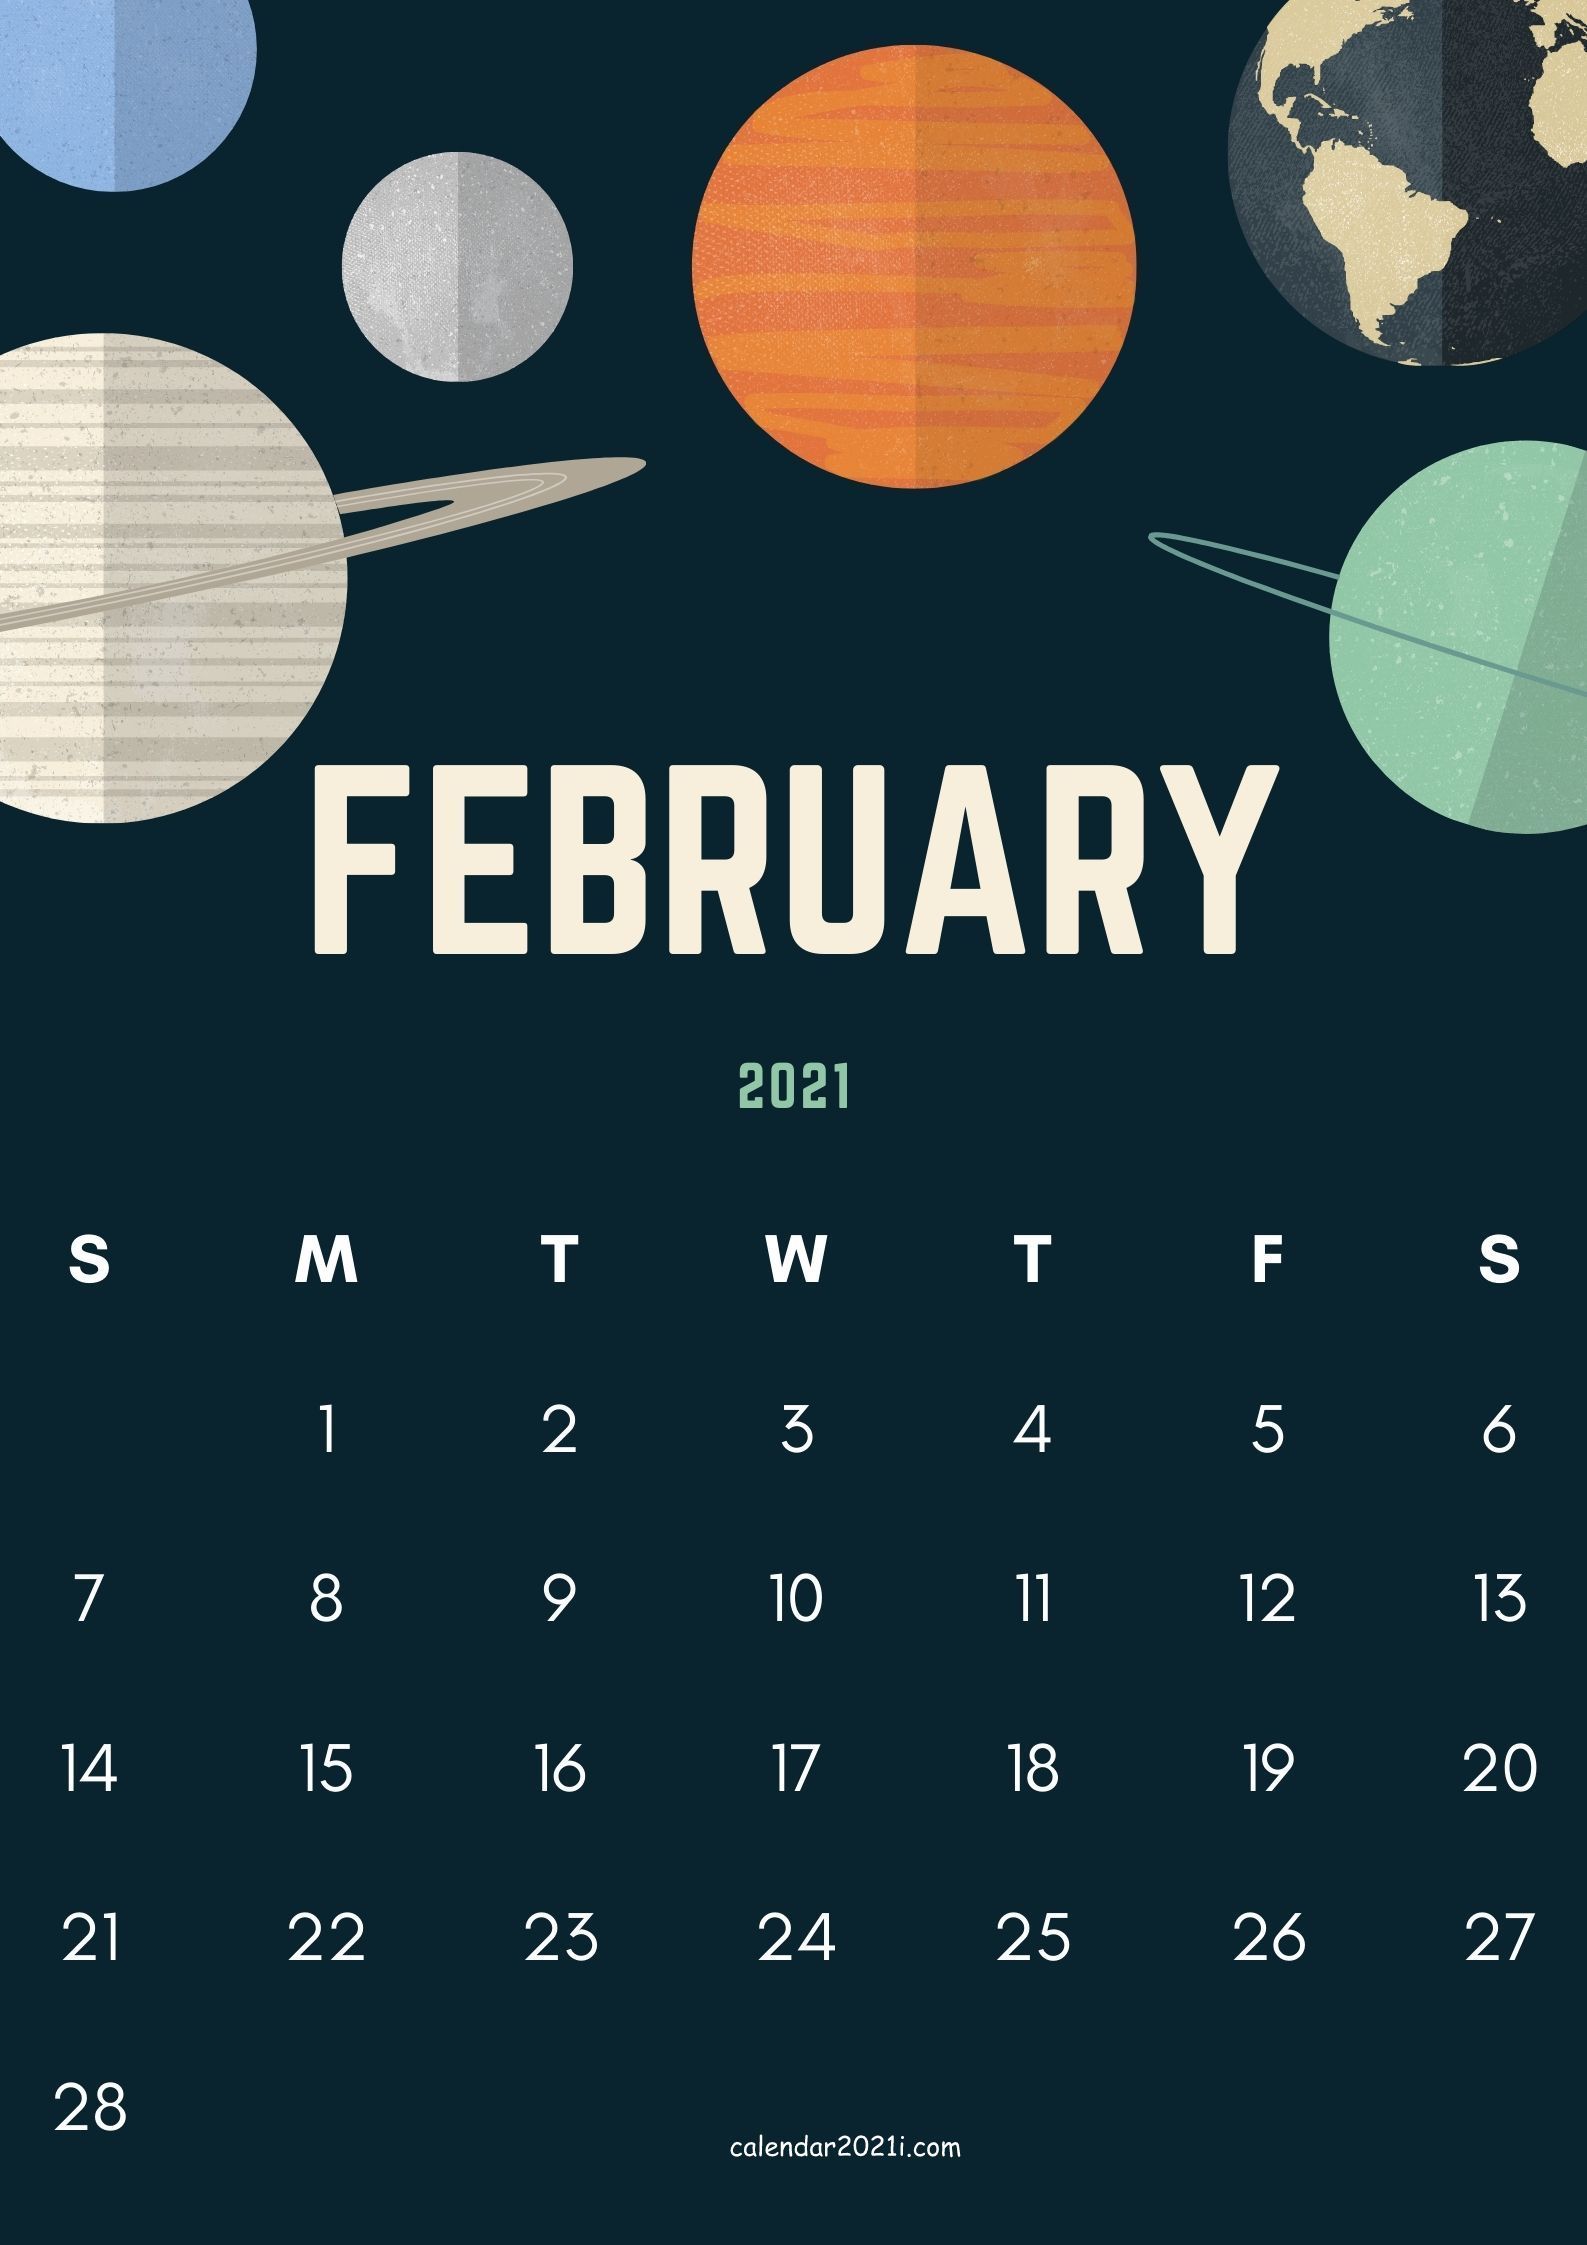 Featured image of post 2021 Calendar Wallpaper Aesthetic : As 2020 comes to a close, it&#039;s time to start planning the next 12 months and pick up a 2021 calendar.